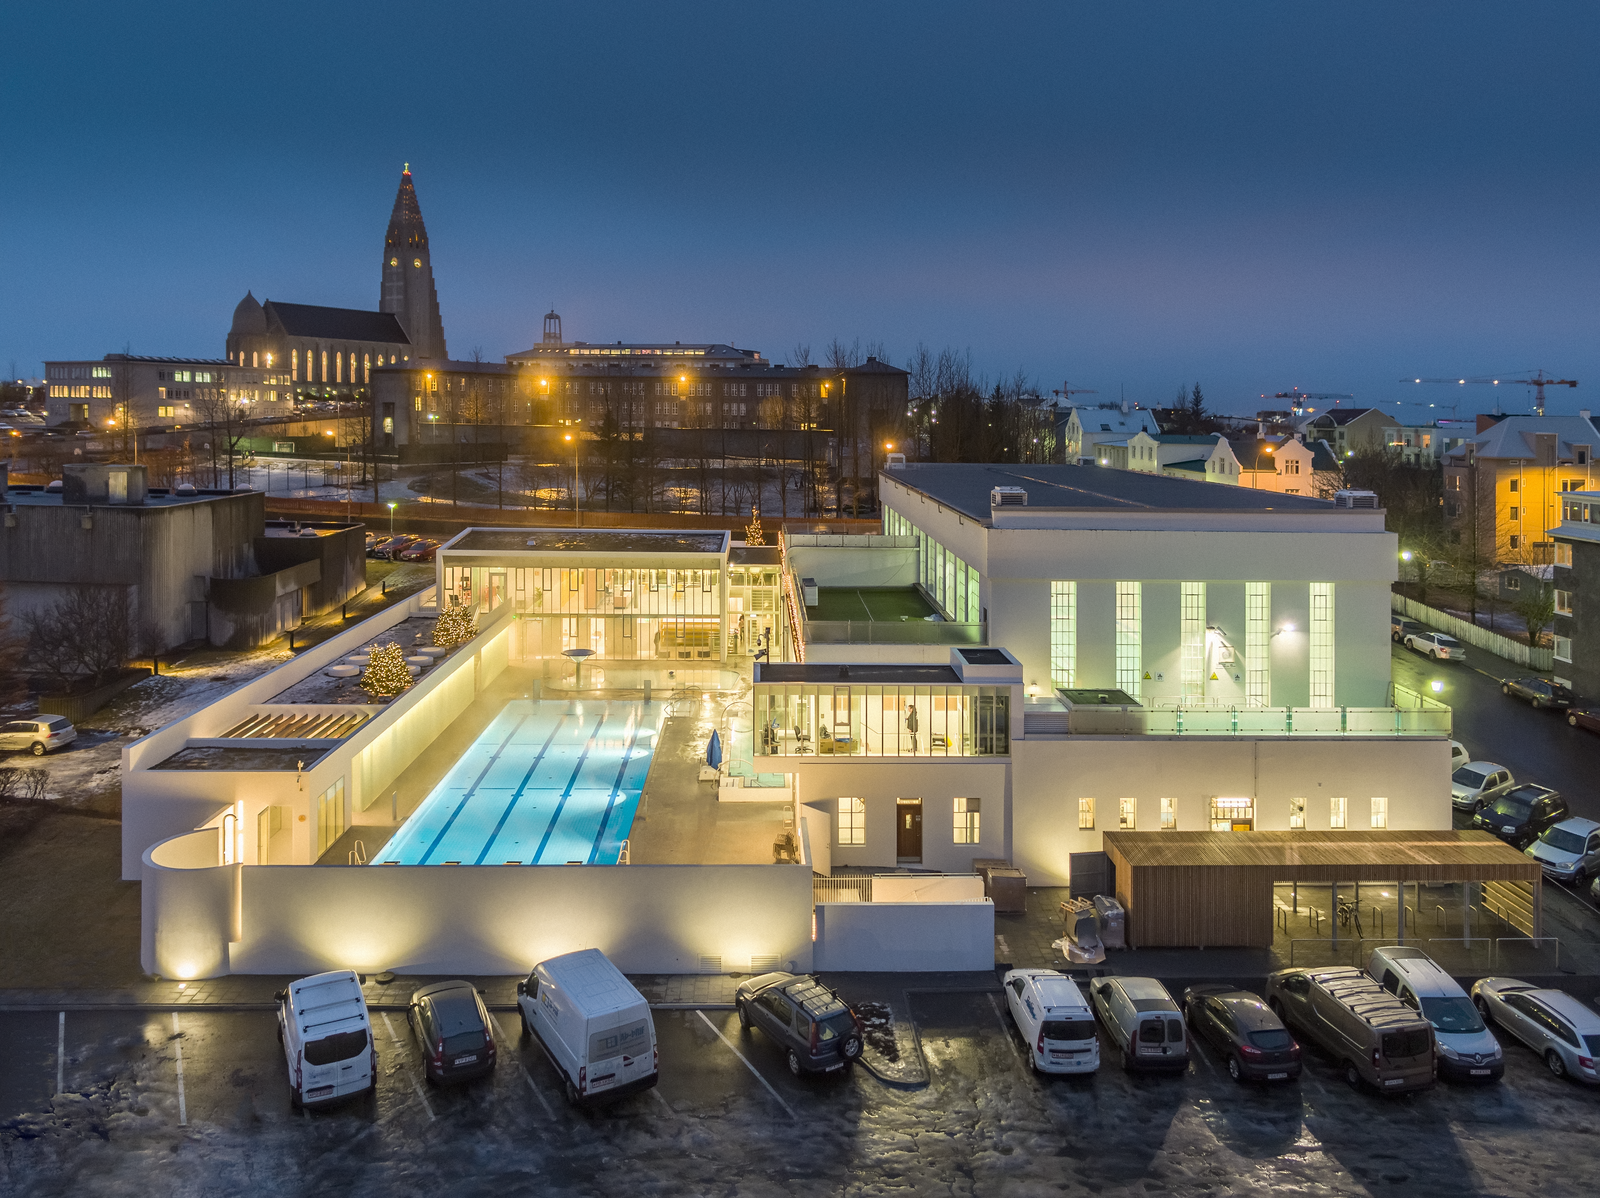 Reykjavík's swimming pools are open late, so you can spend your evening unwinding in the warm, geothermal waters.